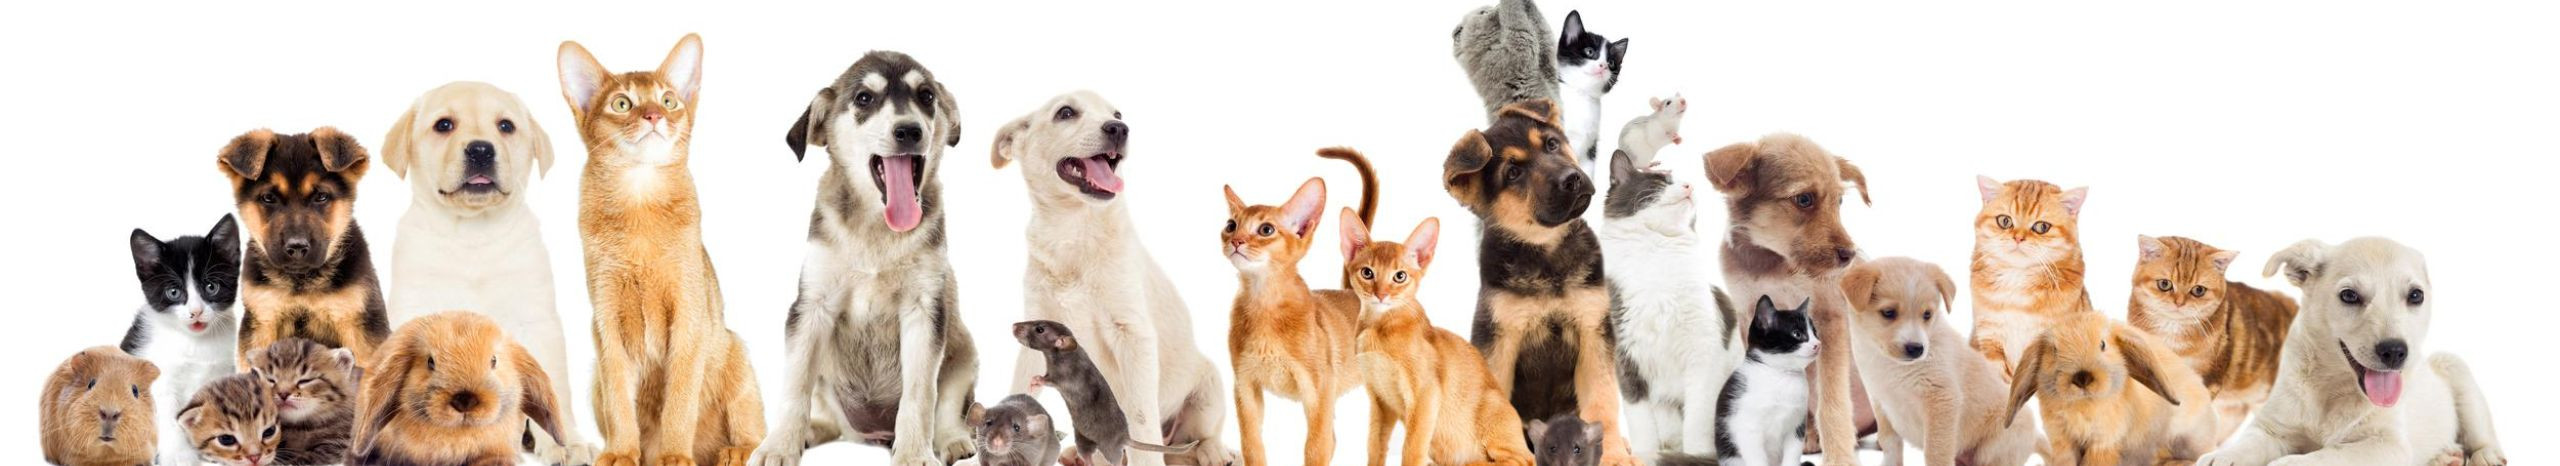 dog treats and bonuses, exhibition accessories, Training and training equipment, pet walking objects, shampoos and conditioners, food additives, food and accessories for parrots, accessories for pet animals, equine accessories, Cat food